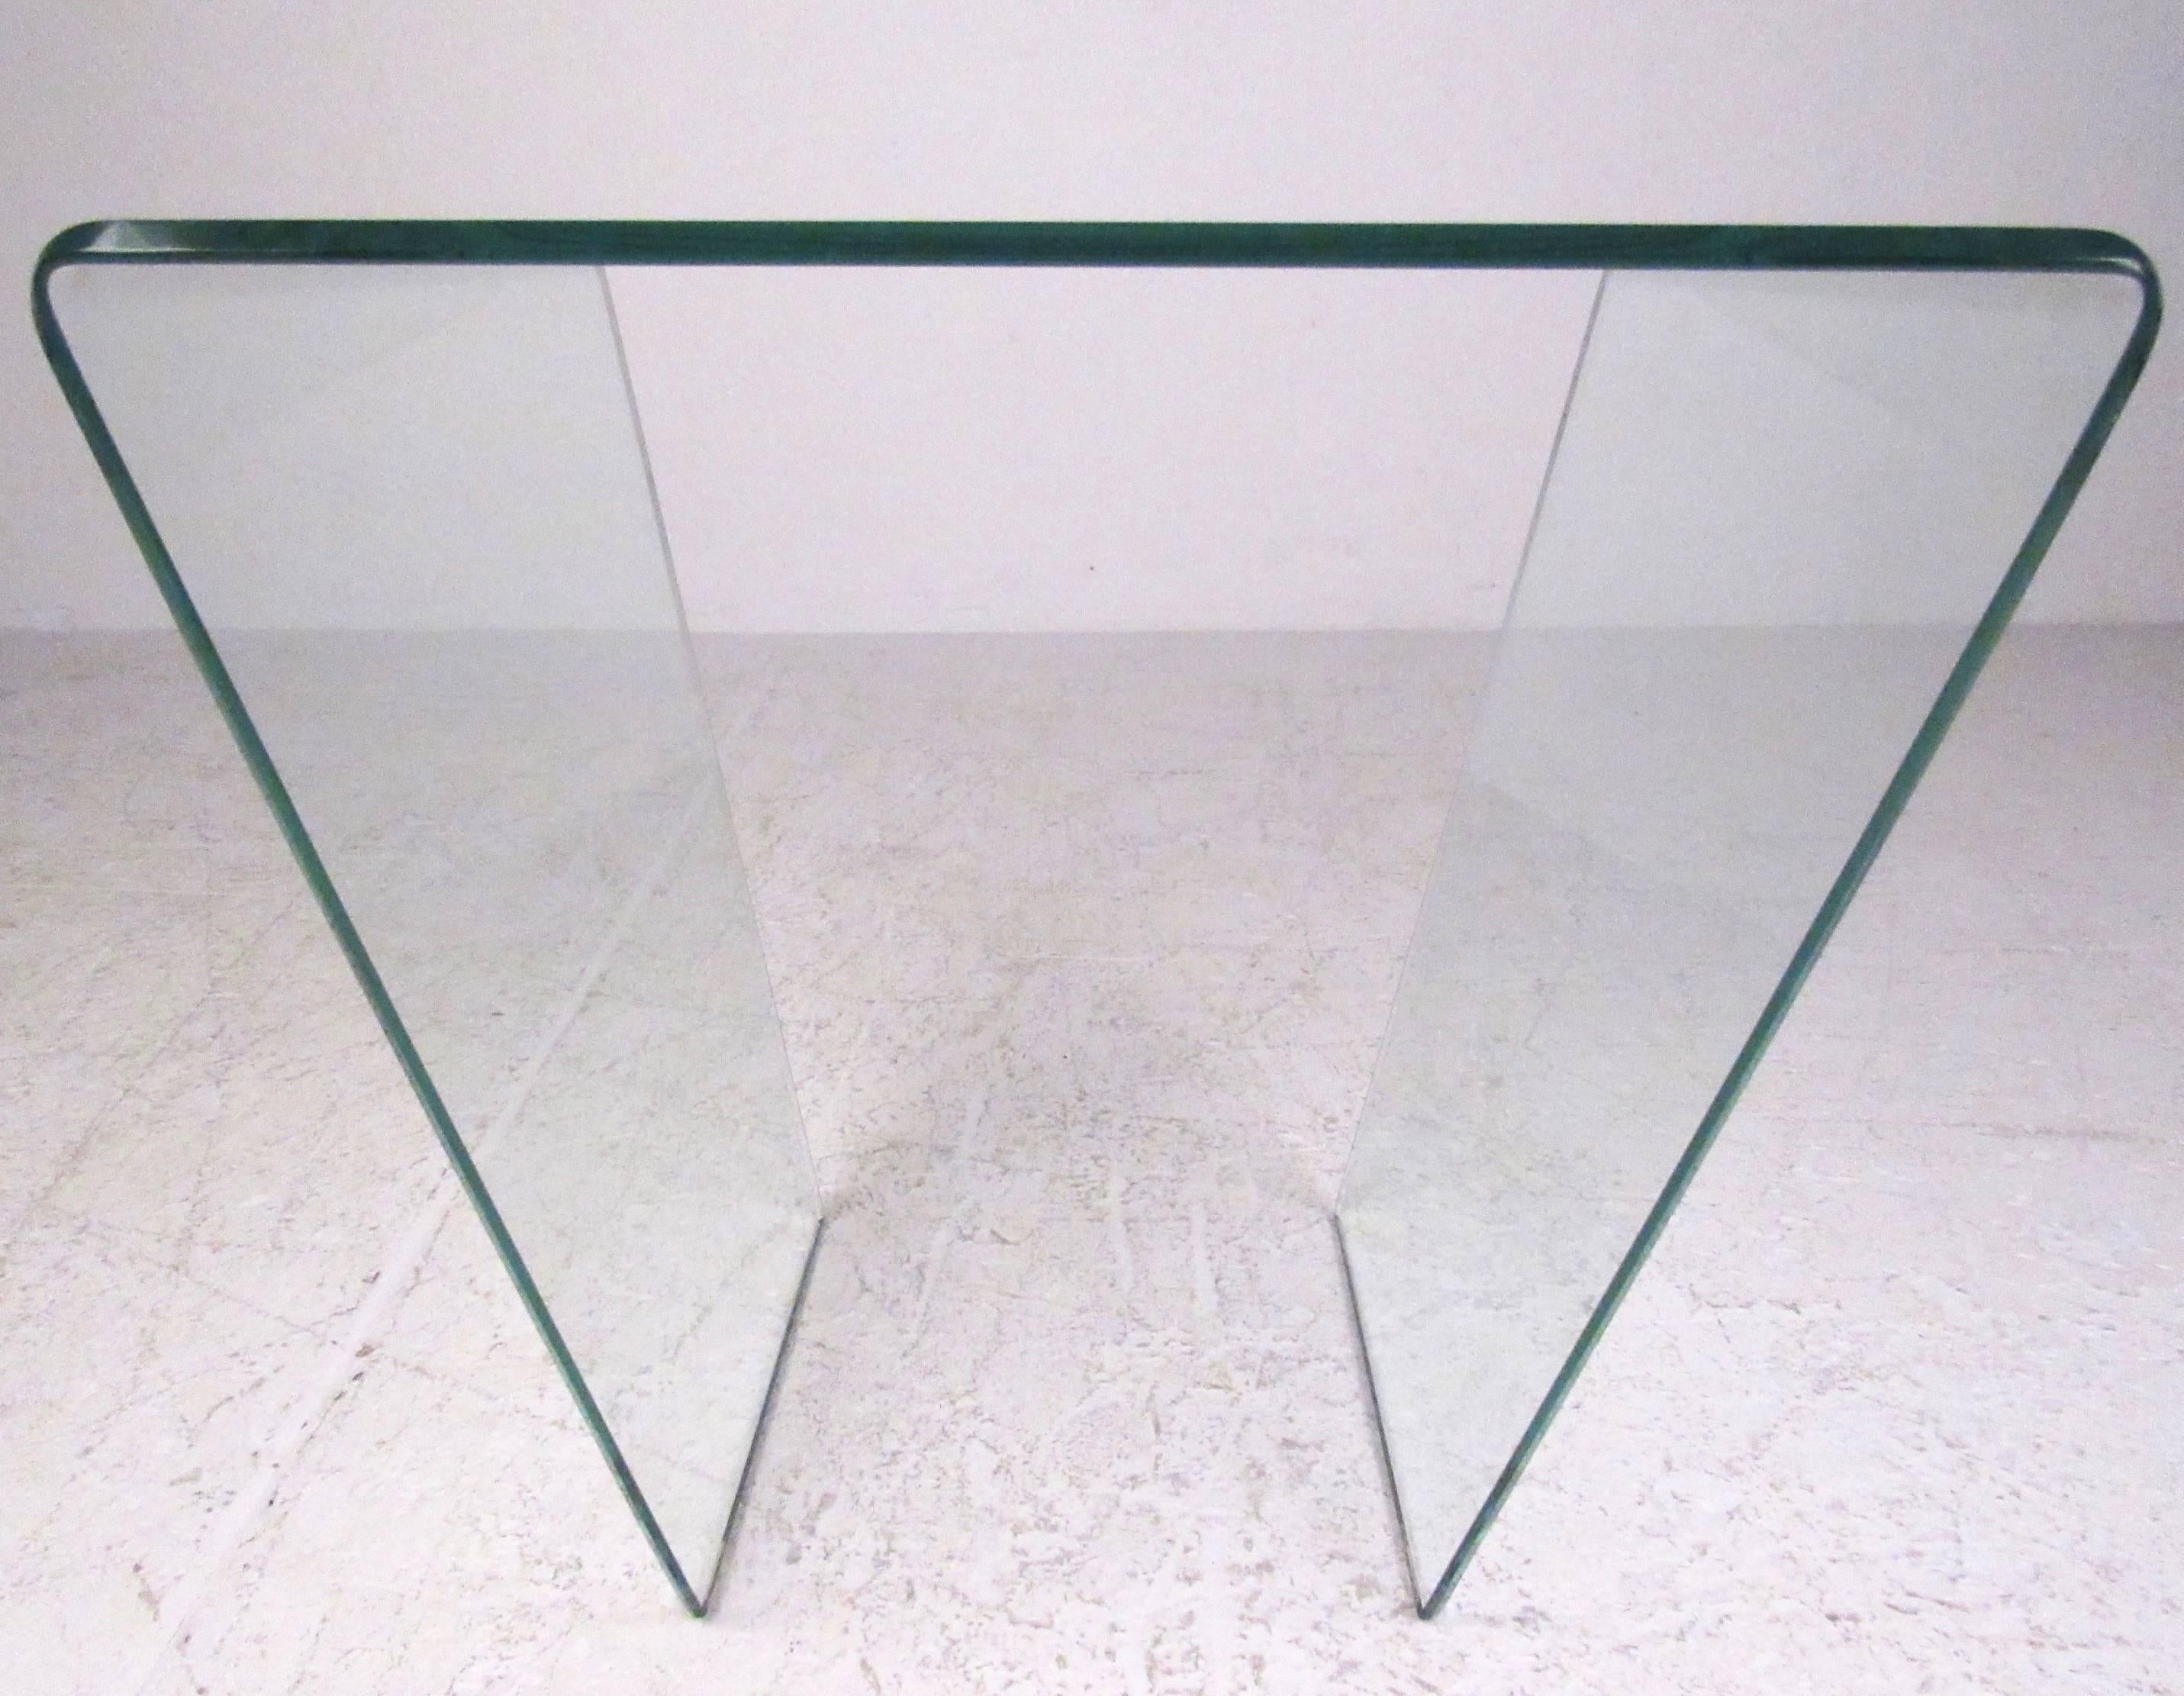 This unique curved glass end table features beveled edges and a uniquely angular design, somewhat similar to the iconic waterfall tables designed by Angelo Cortesi for Fiam. Stylish yet simple addition to any interior, please confirm item location